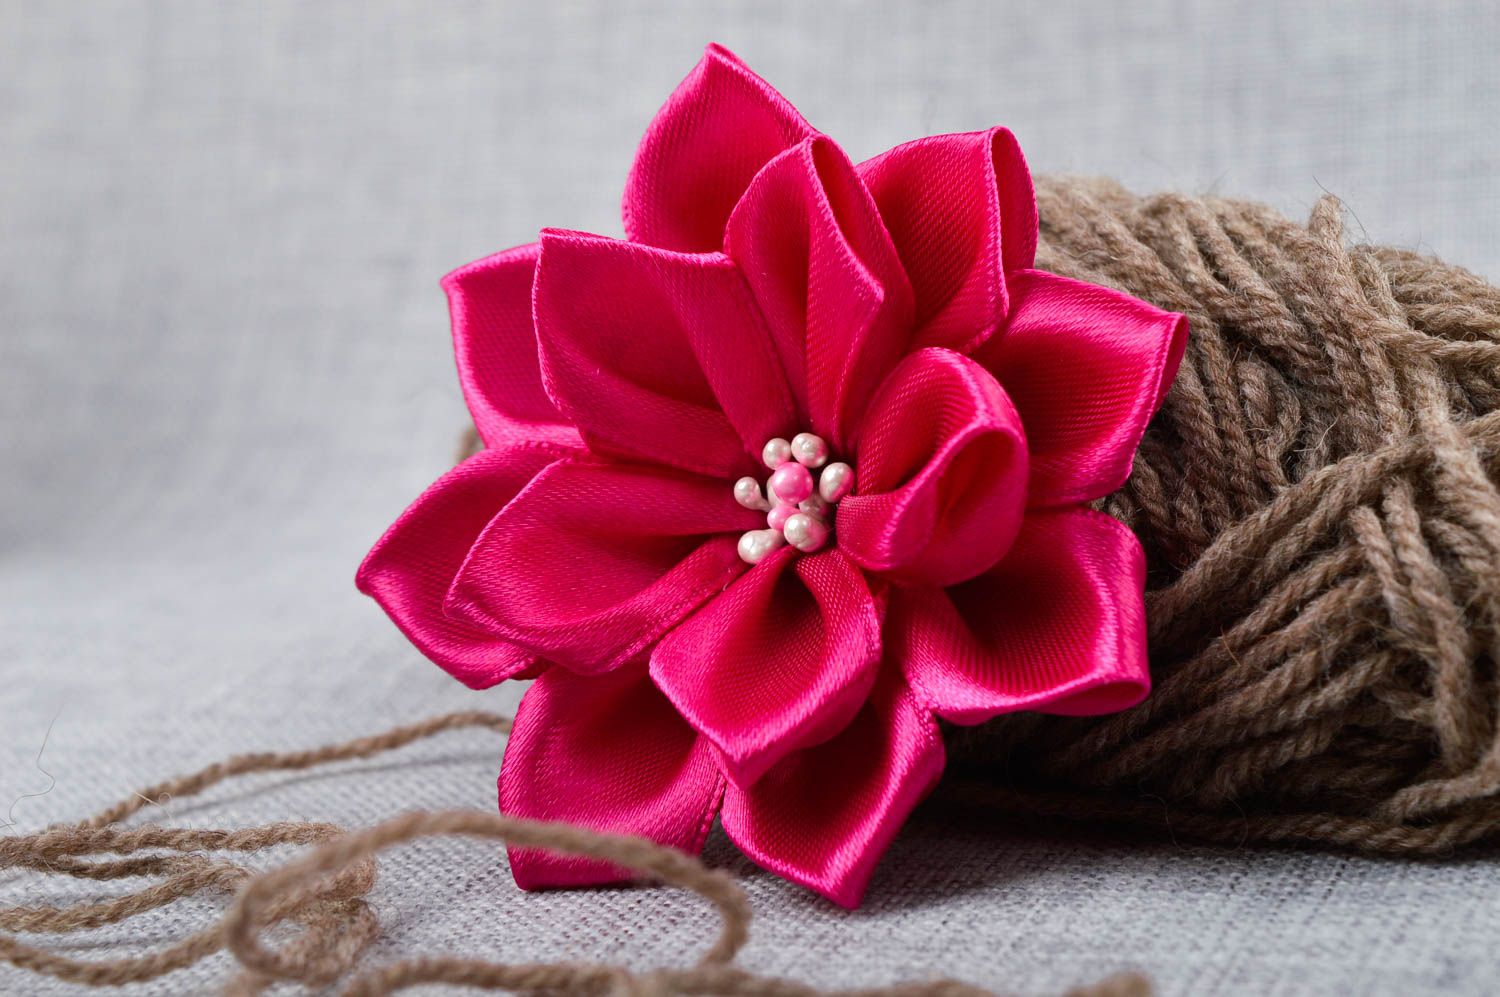 Stylish handmade flower brooch jewelry textile barrette hair clip gifts for her photo 1